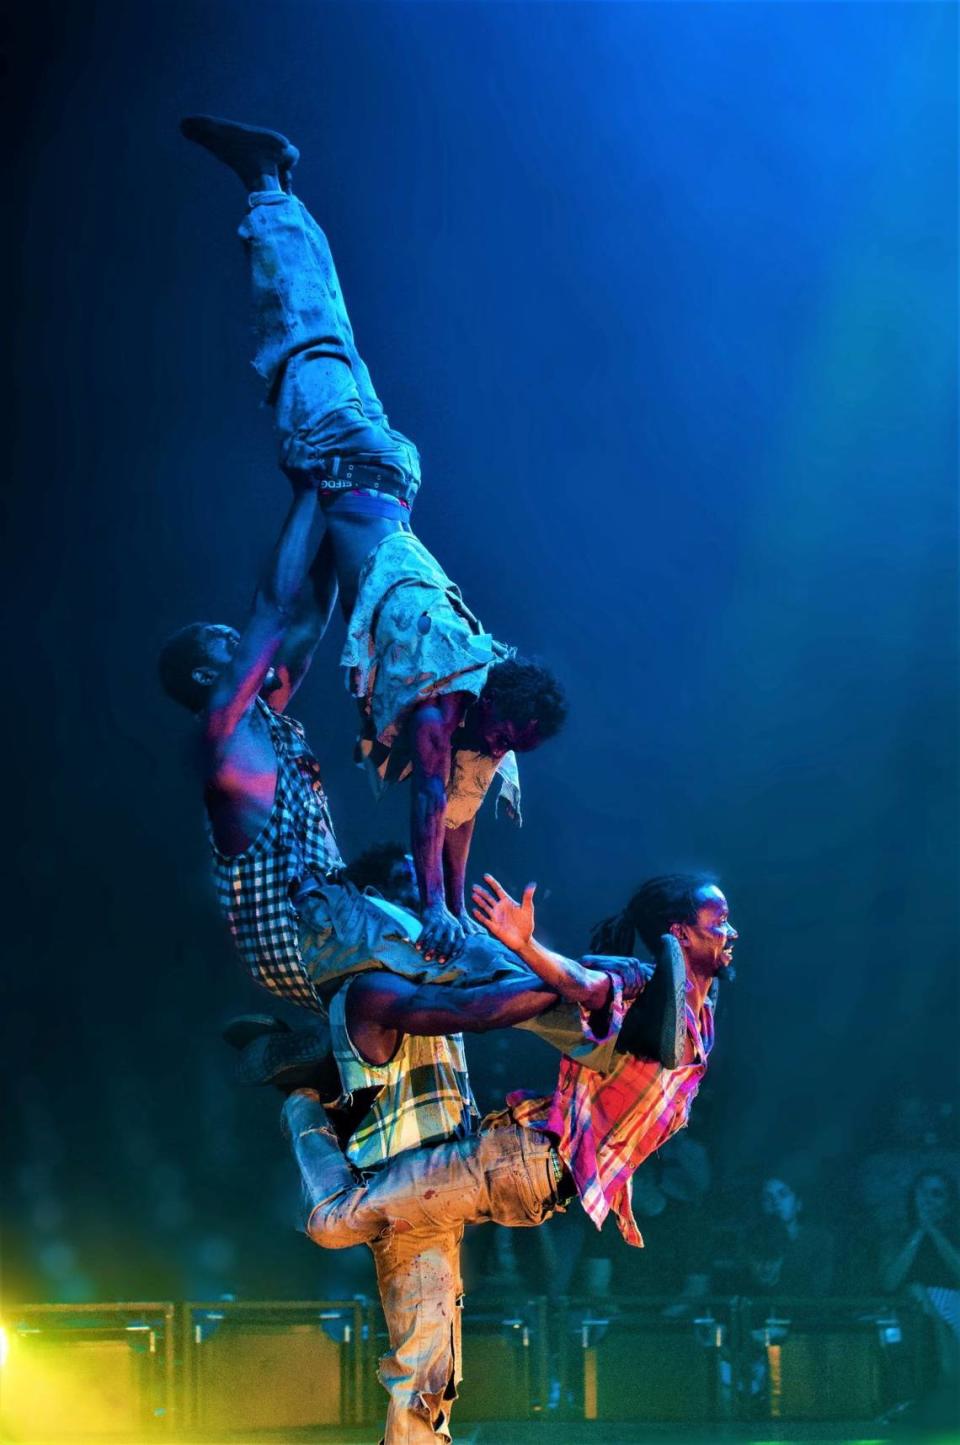 Group of acrobats show off stacking skills in a zombie performance during Paranormal Cirque. Jhoan Francisco /Courtesy: Paranormal Cirque